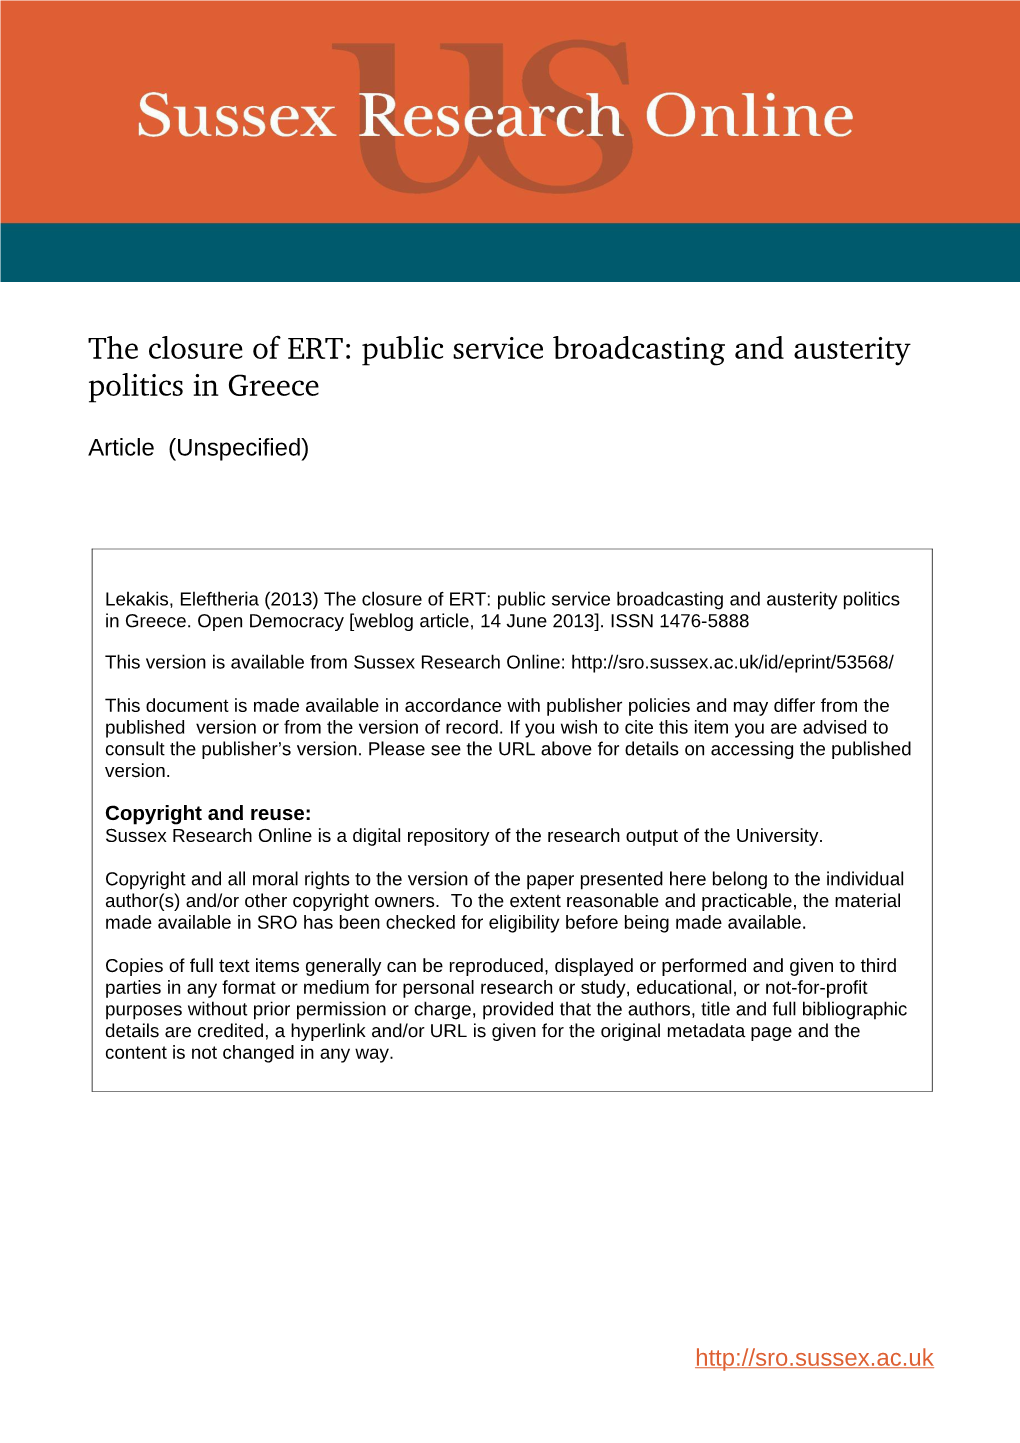 The Closure of ERT: Public Service Broadcasting and Austerity Politics in Greece